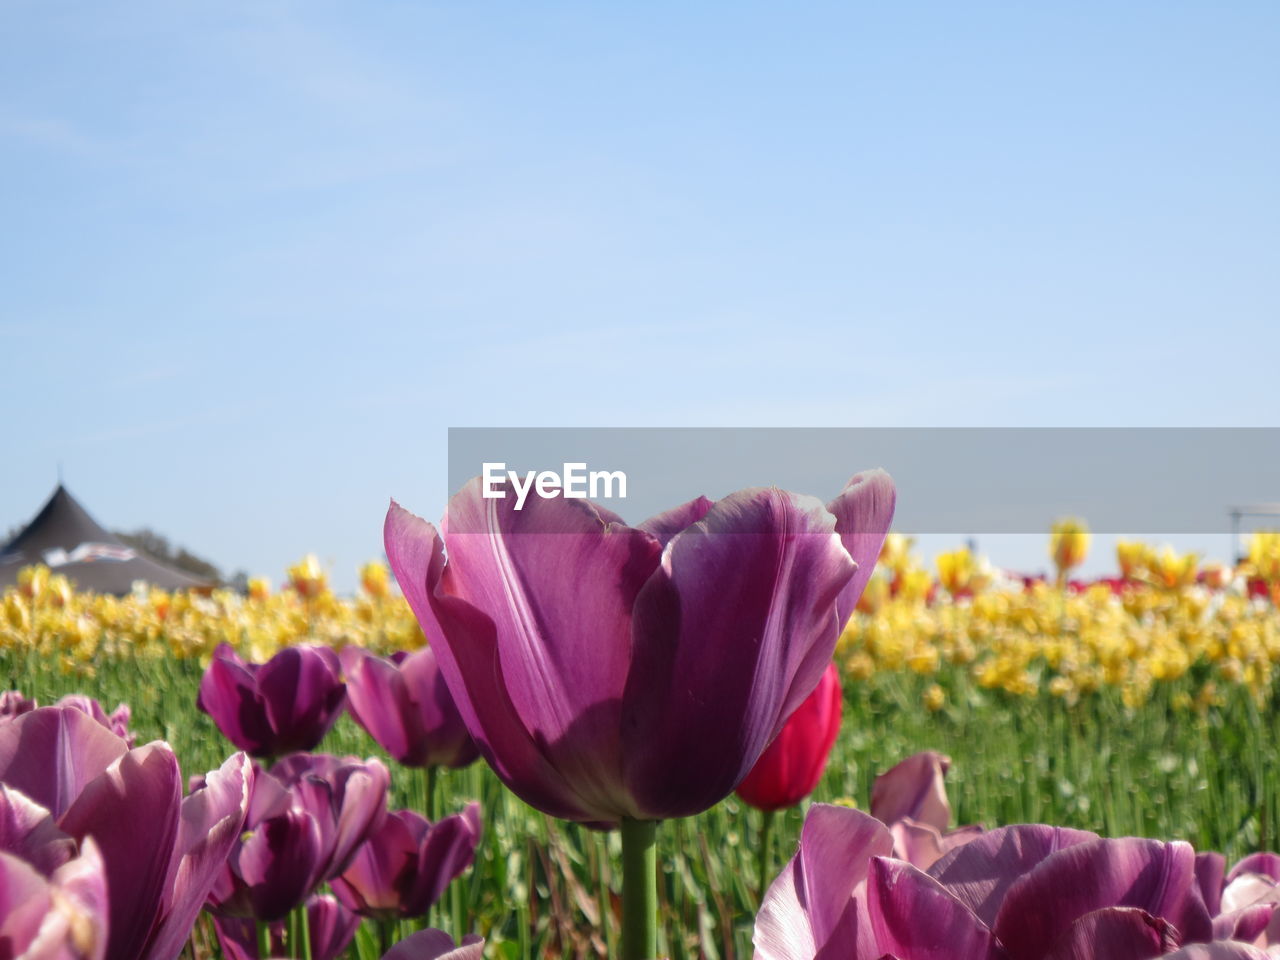 flower, flowering plant, plant, freshness, beauty in nature, nature, sky, pink, petal, growth, flower head, fragility, purple, close-up, no people, inflorescence, springtime, copy space, field, blue, clear sky, sunlight, tulip, land, landscape, day, focus on foreground, outdoors, summer, multi colored, flowerbed, sunny, blossom, vibrant color, environment, leaf, plant part, tranquility